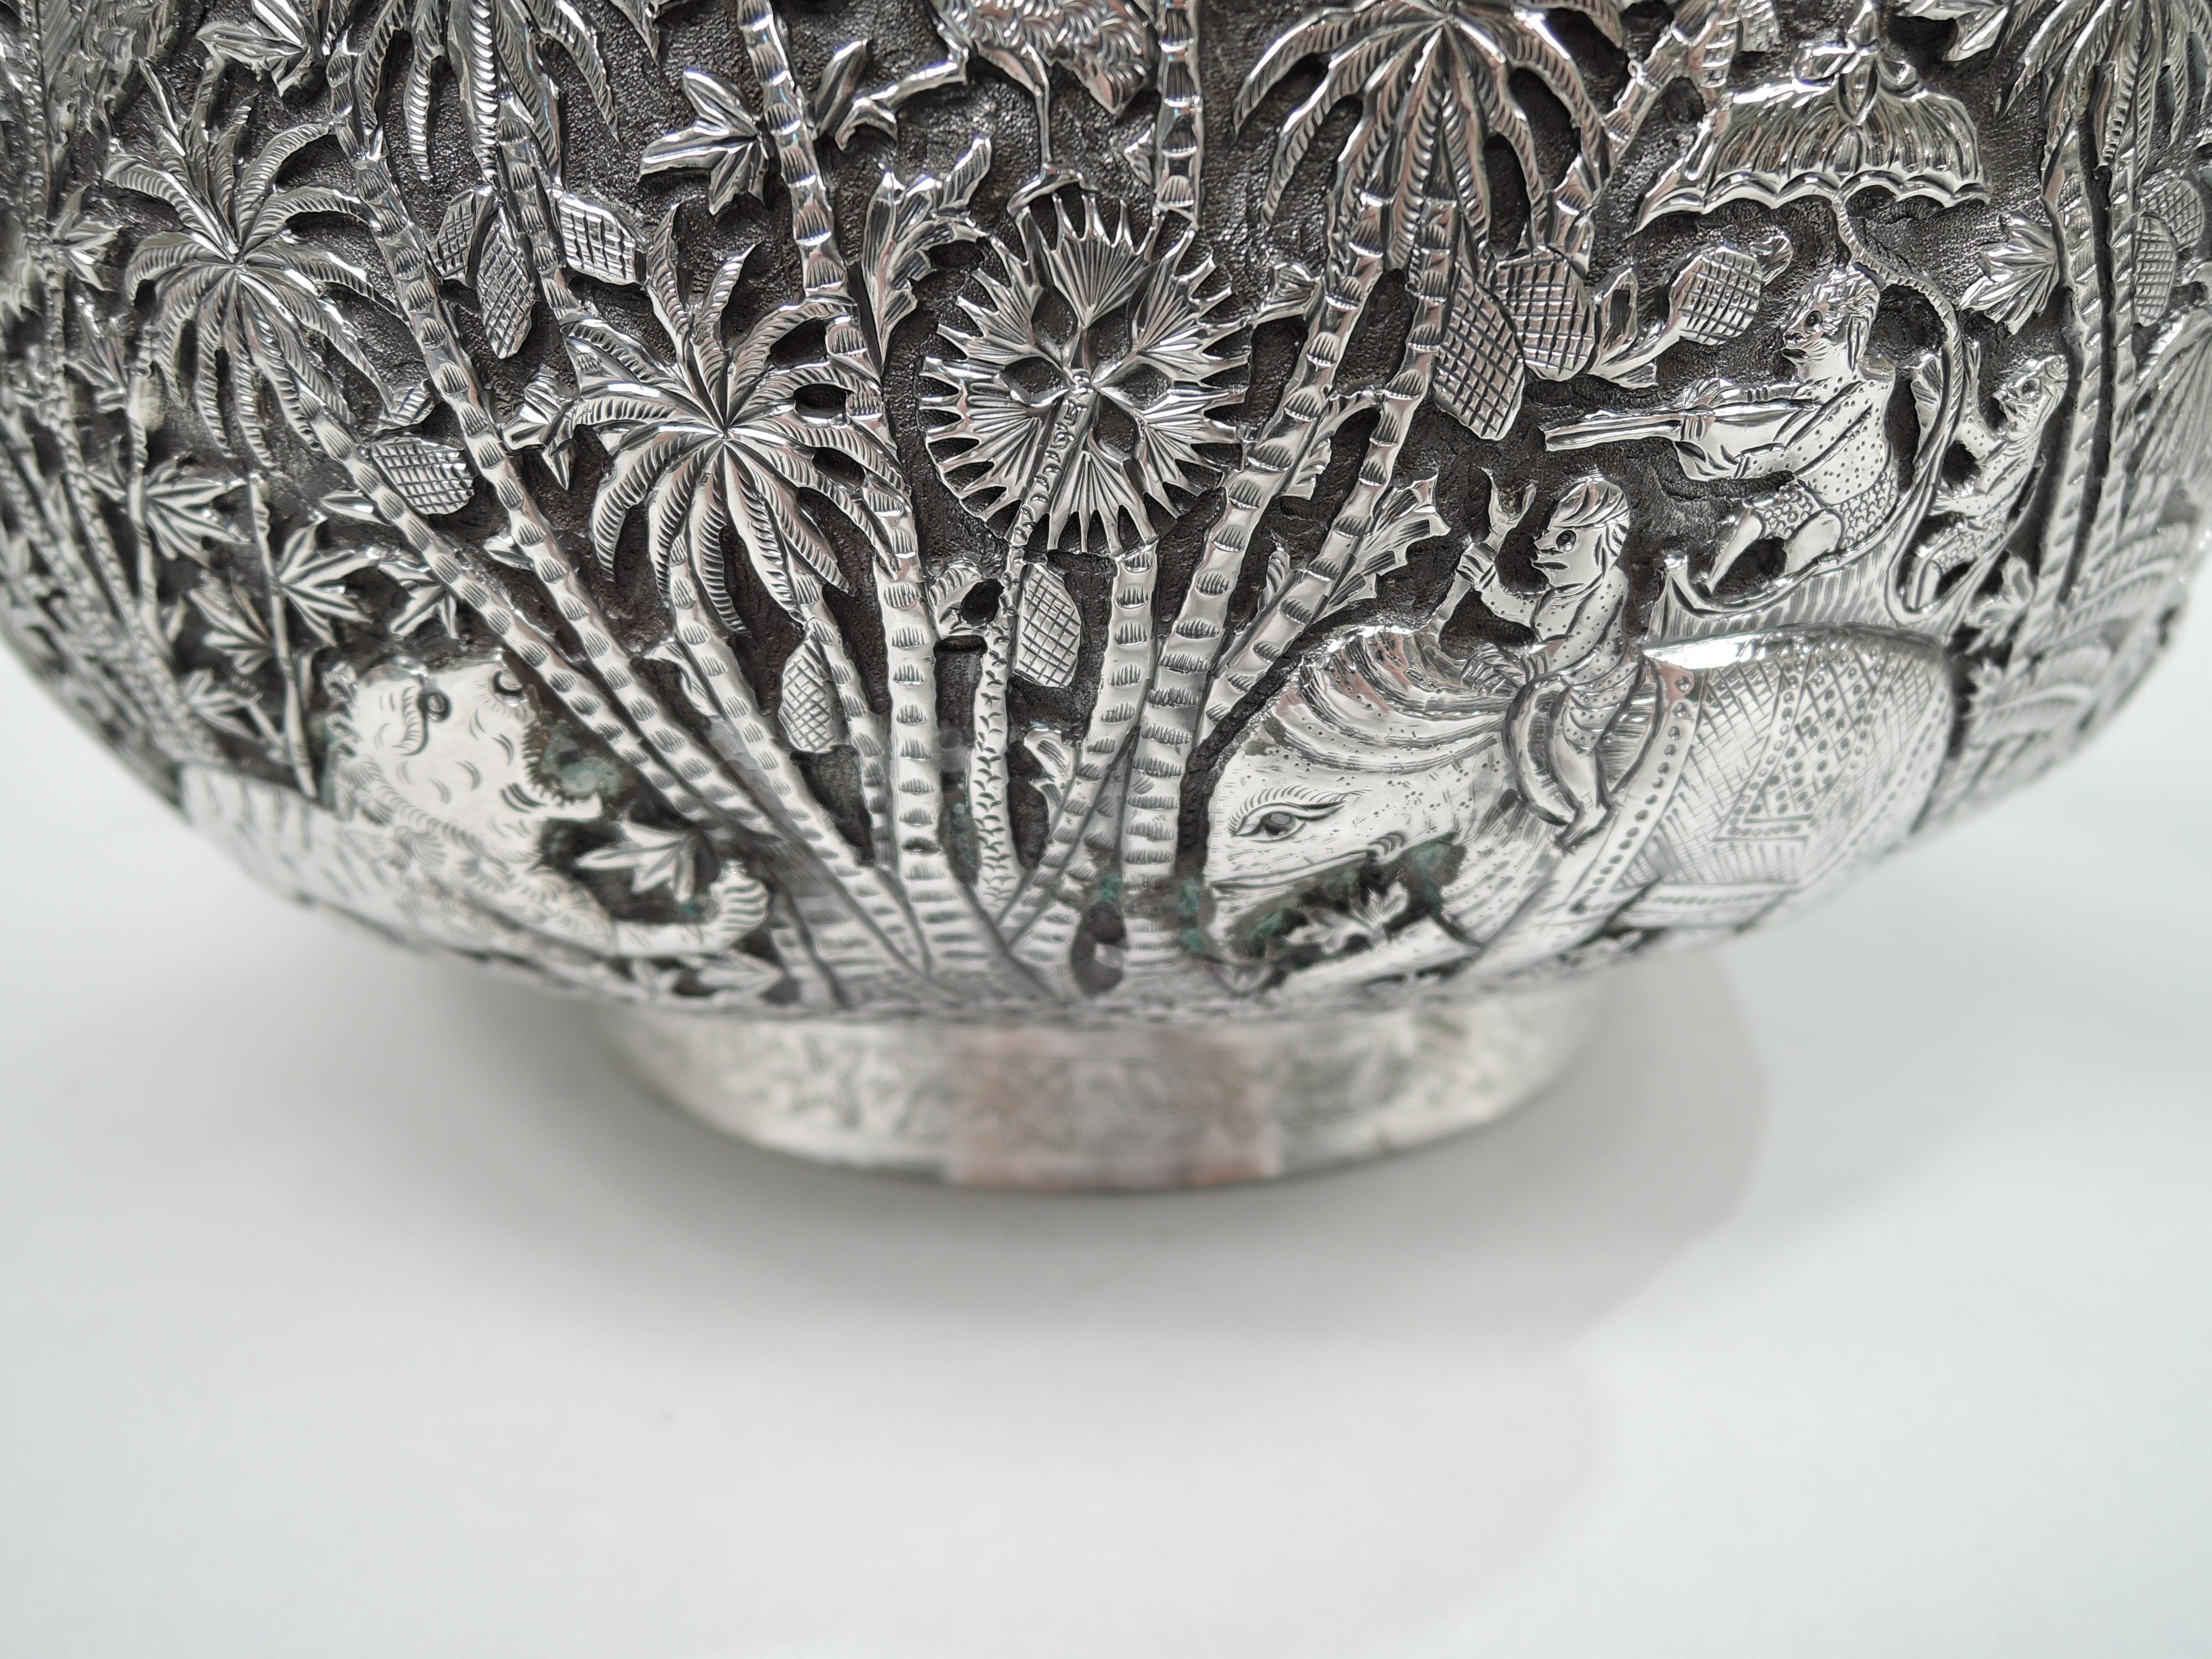 19th Century Indian Colonial Lucknow Silver Bowl with Chicago Golf Club Association